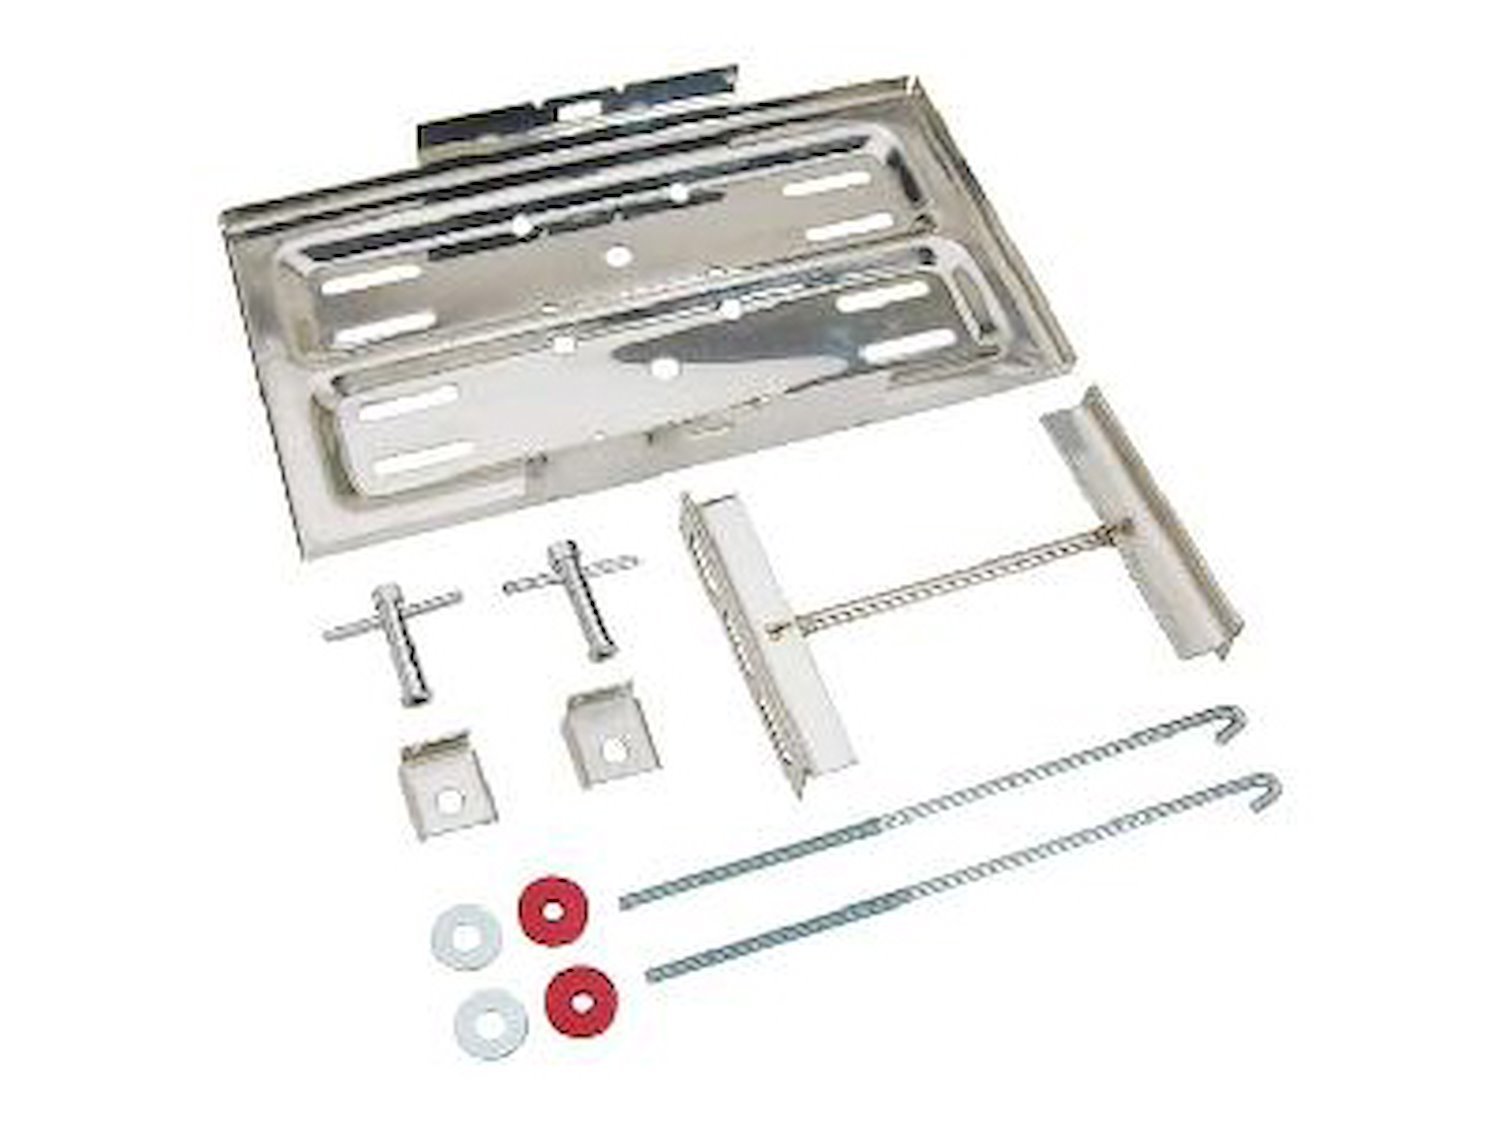 Stainless Steel Battery Tray Kit for Group 24,